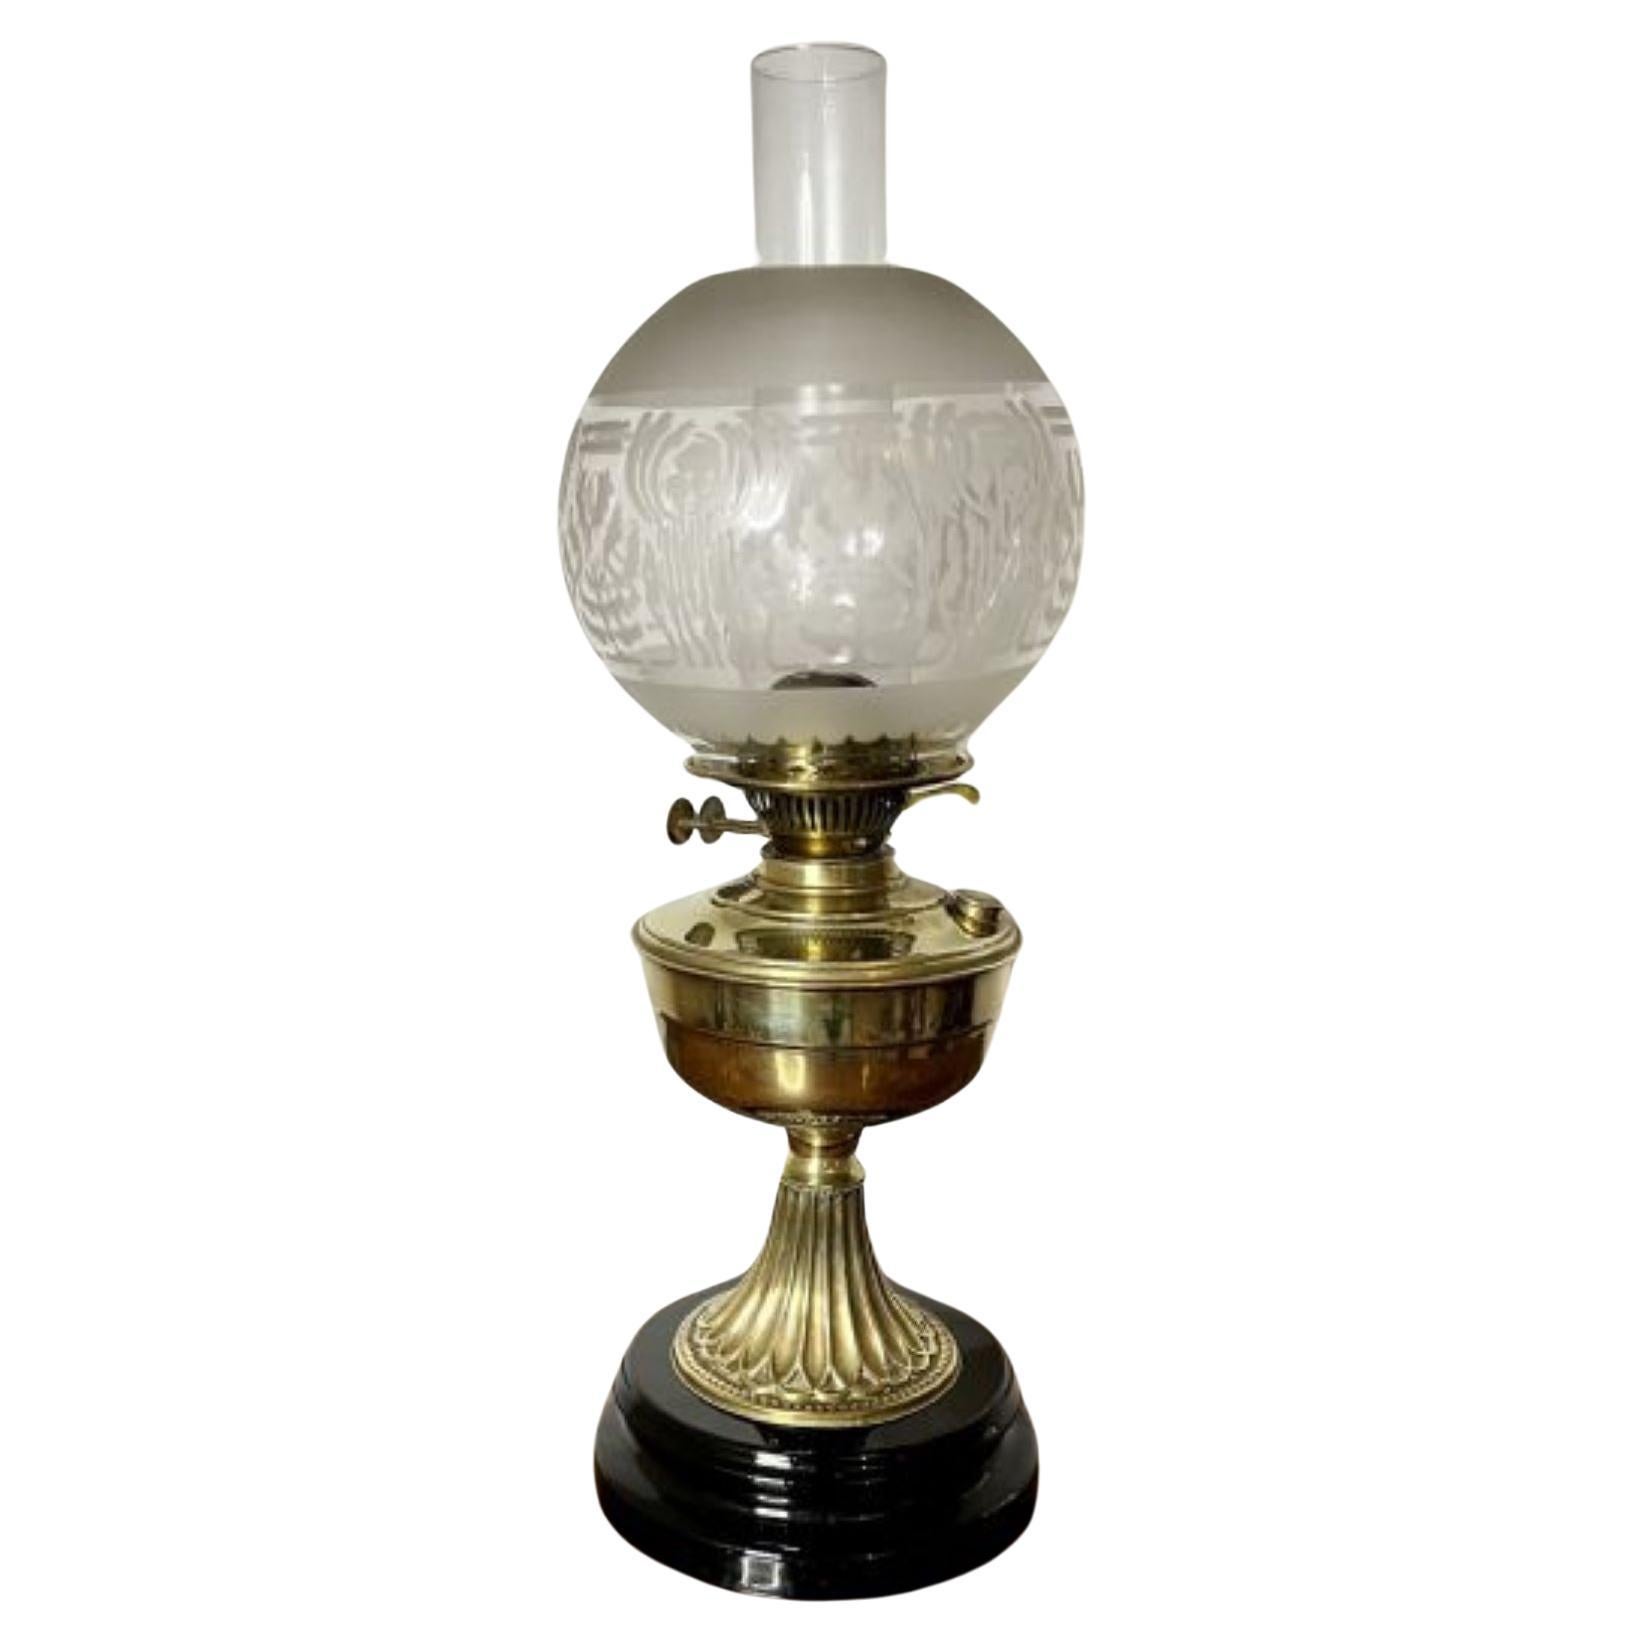 Lovely quality antique Victorian brass oil lamp 